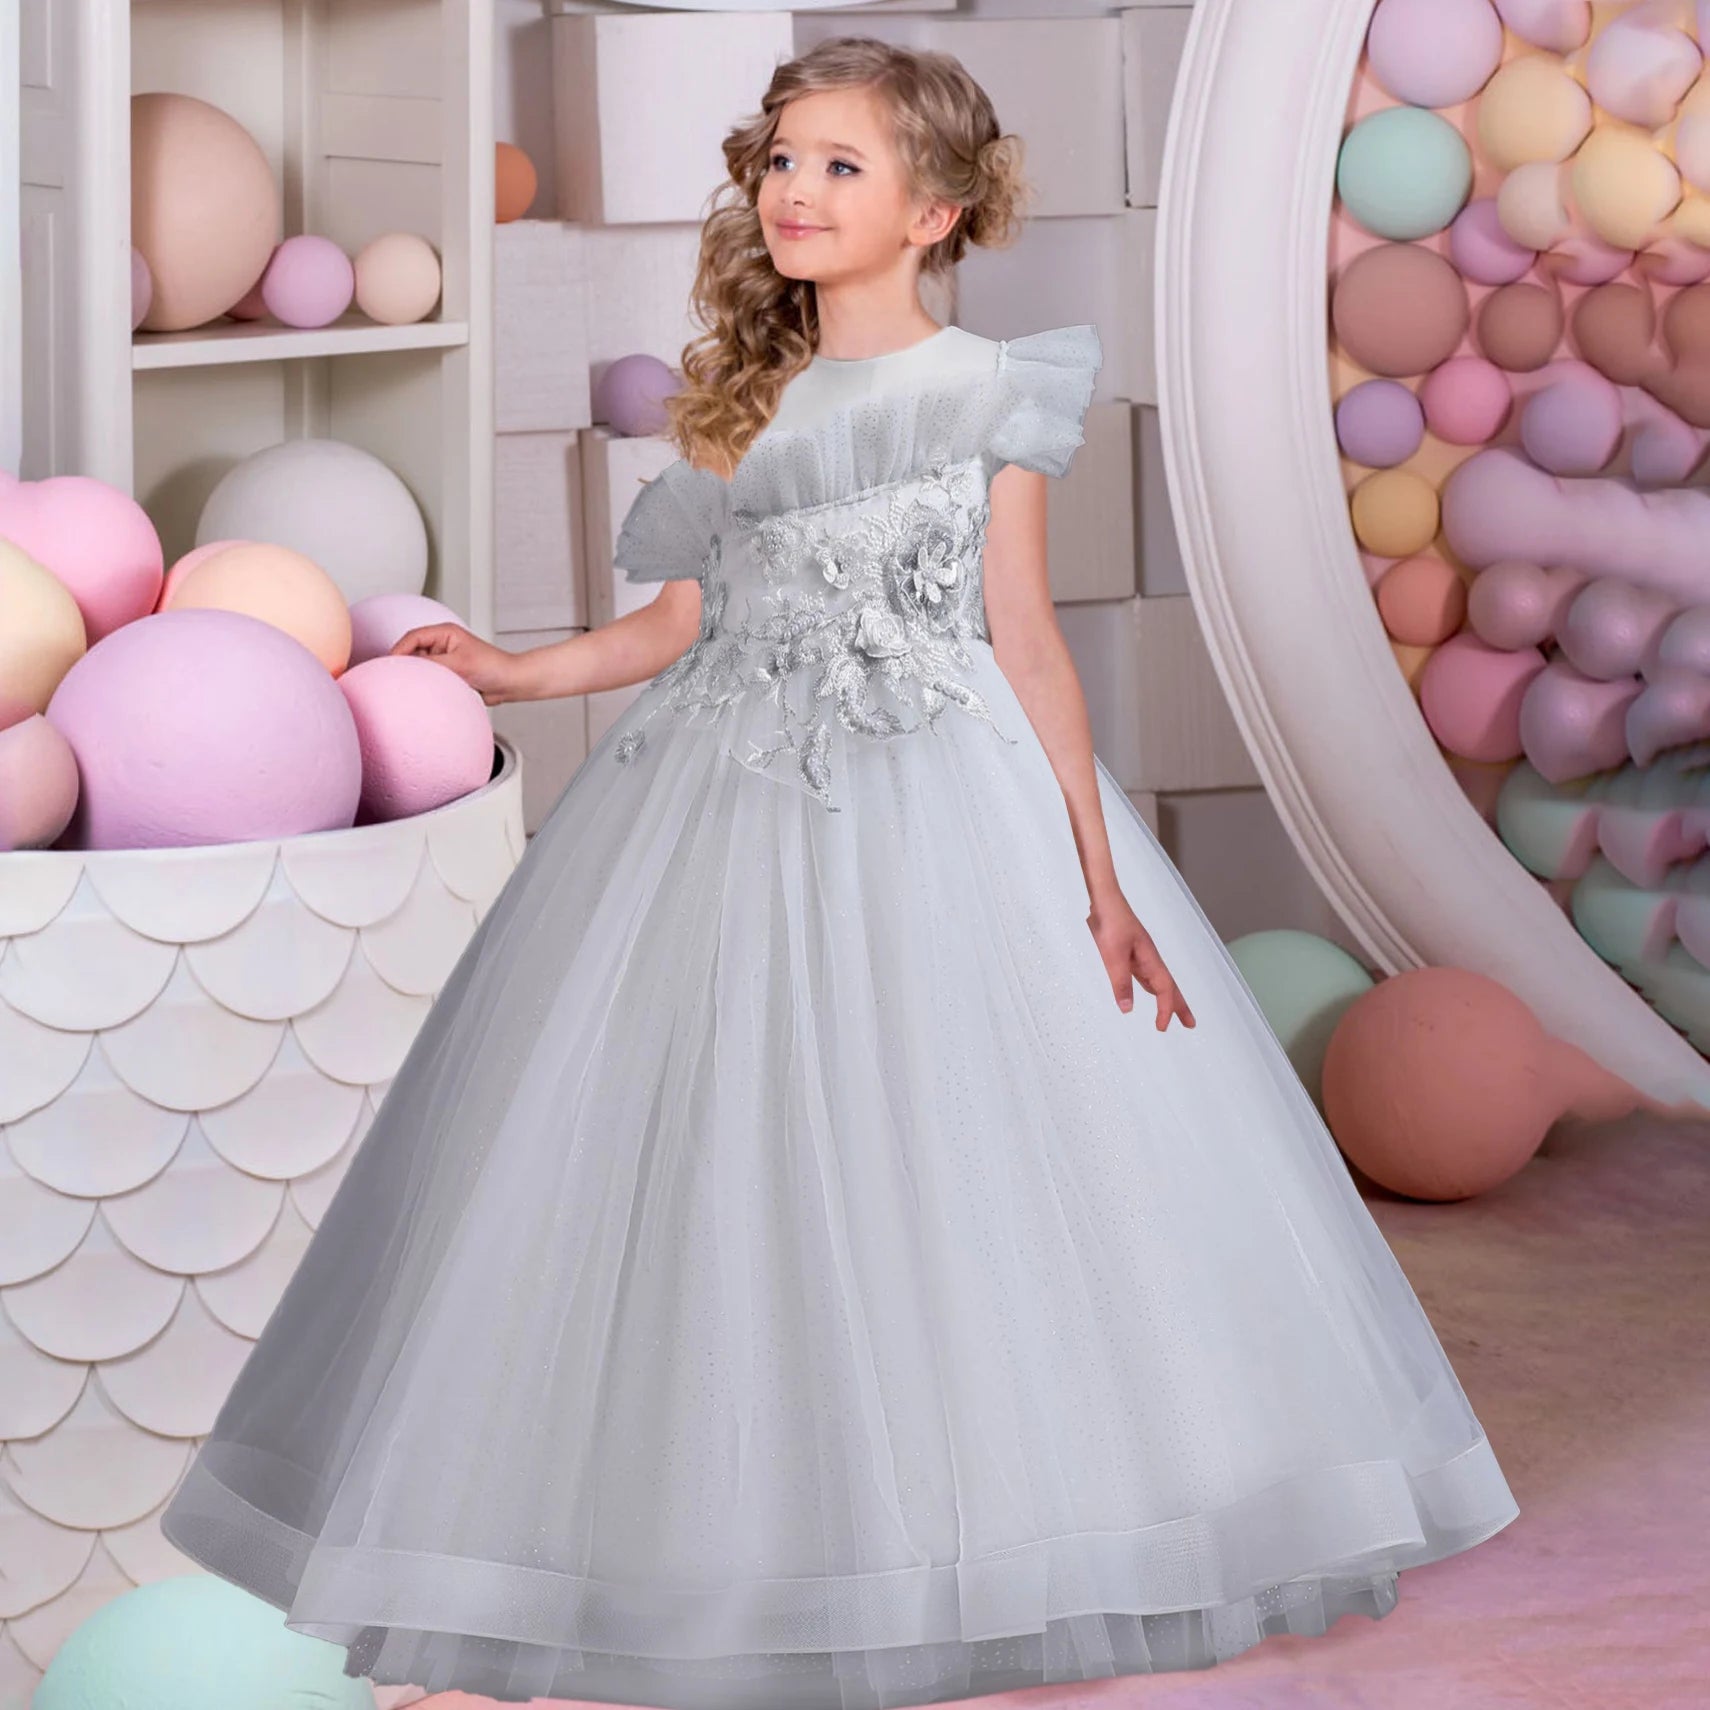 Tulle Flower Girl Dress with floral embroidery white by Baby Minaj Cruz